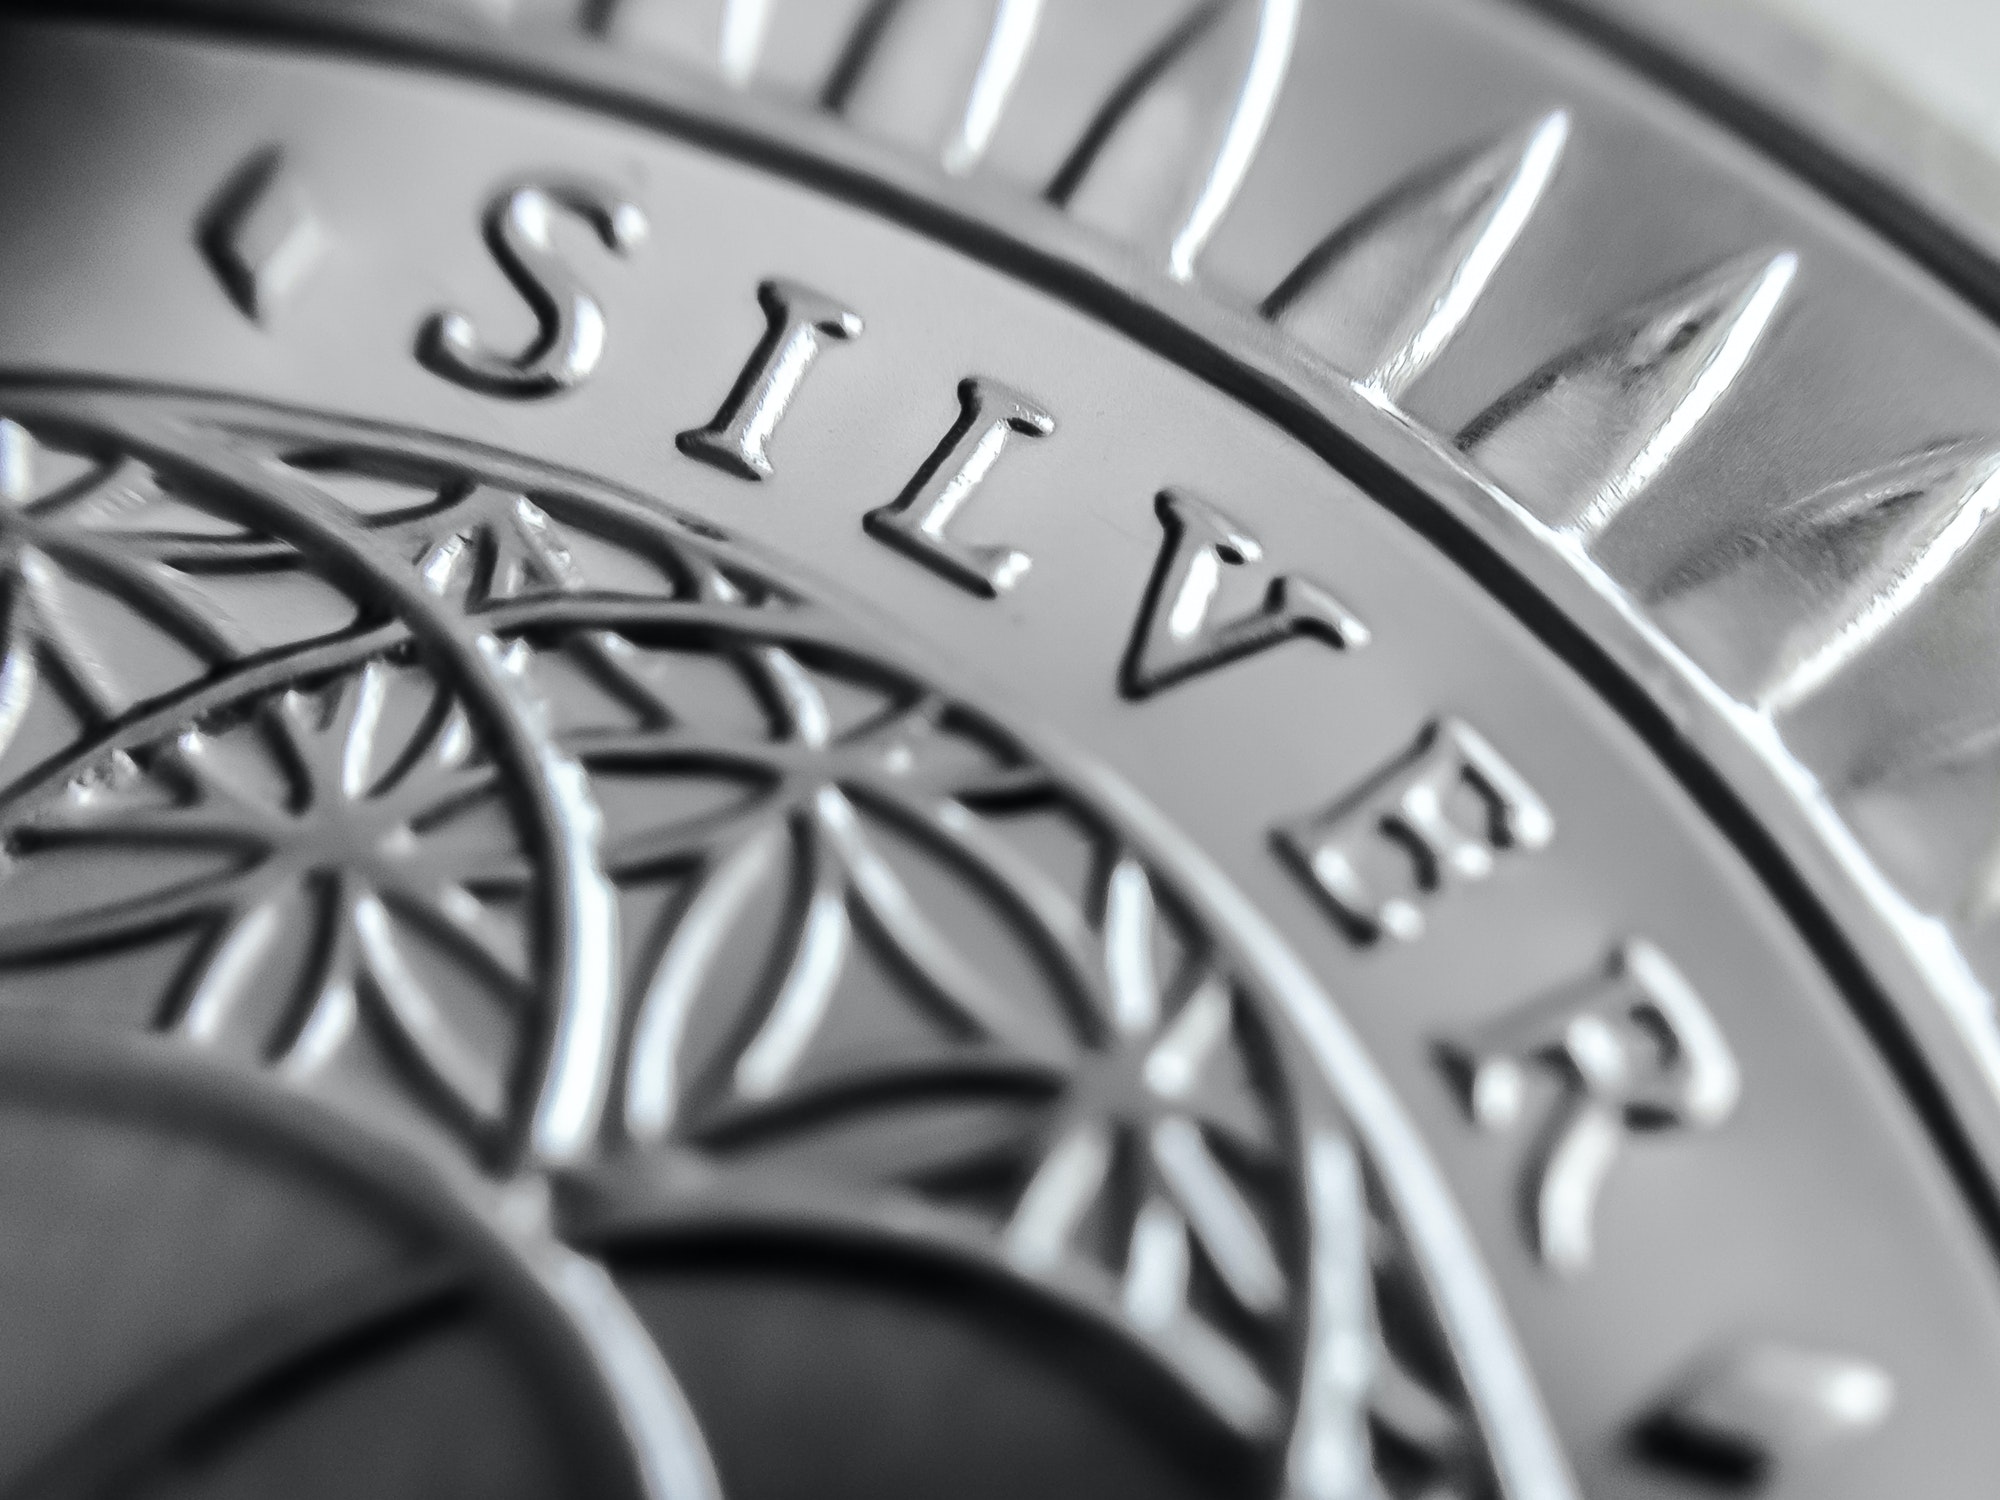 Closeup grayscale of a coin with "Silver" writing